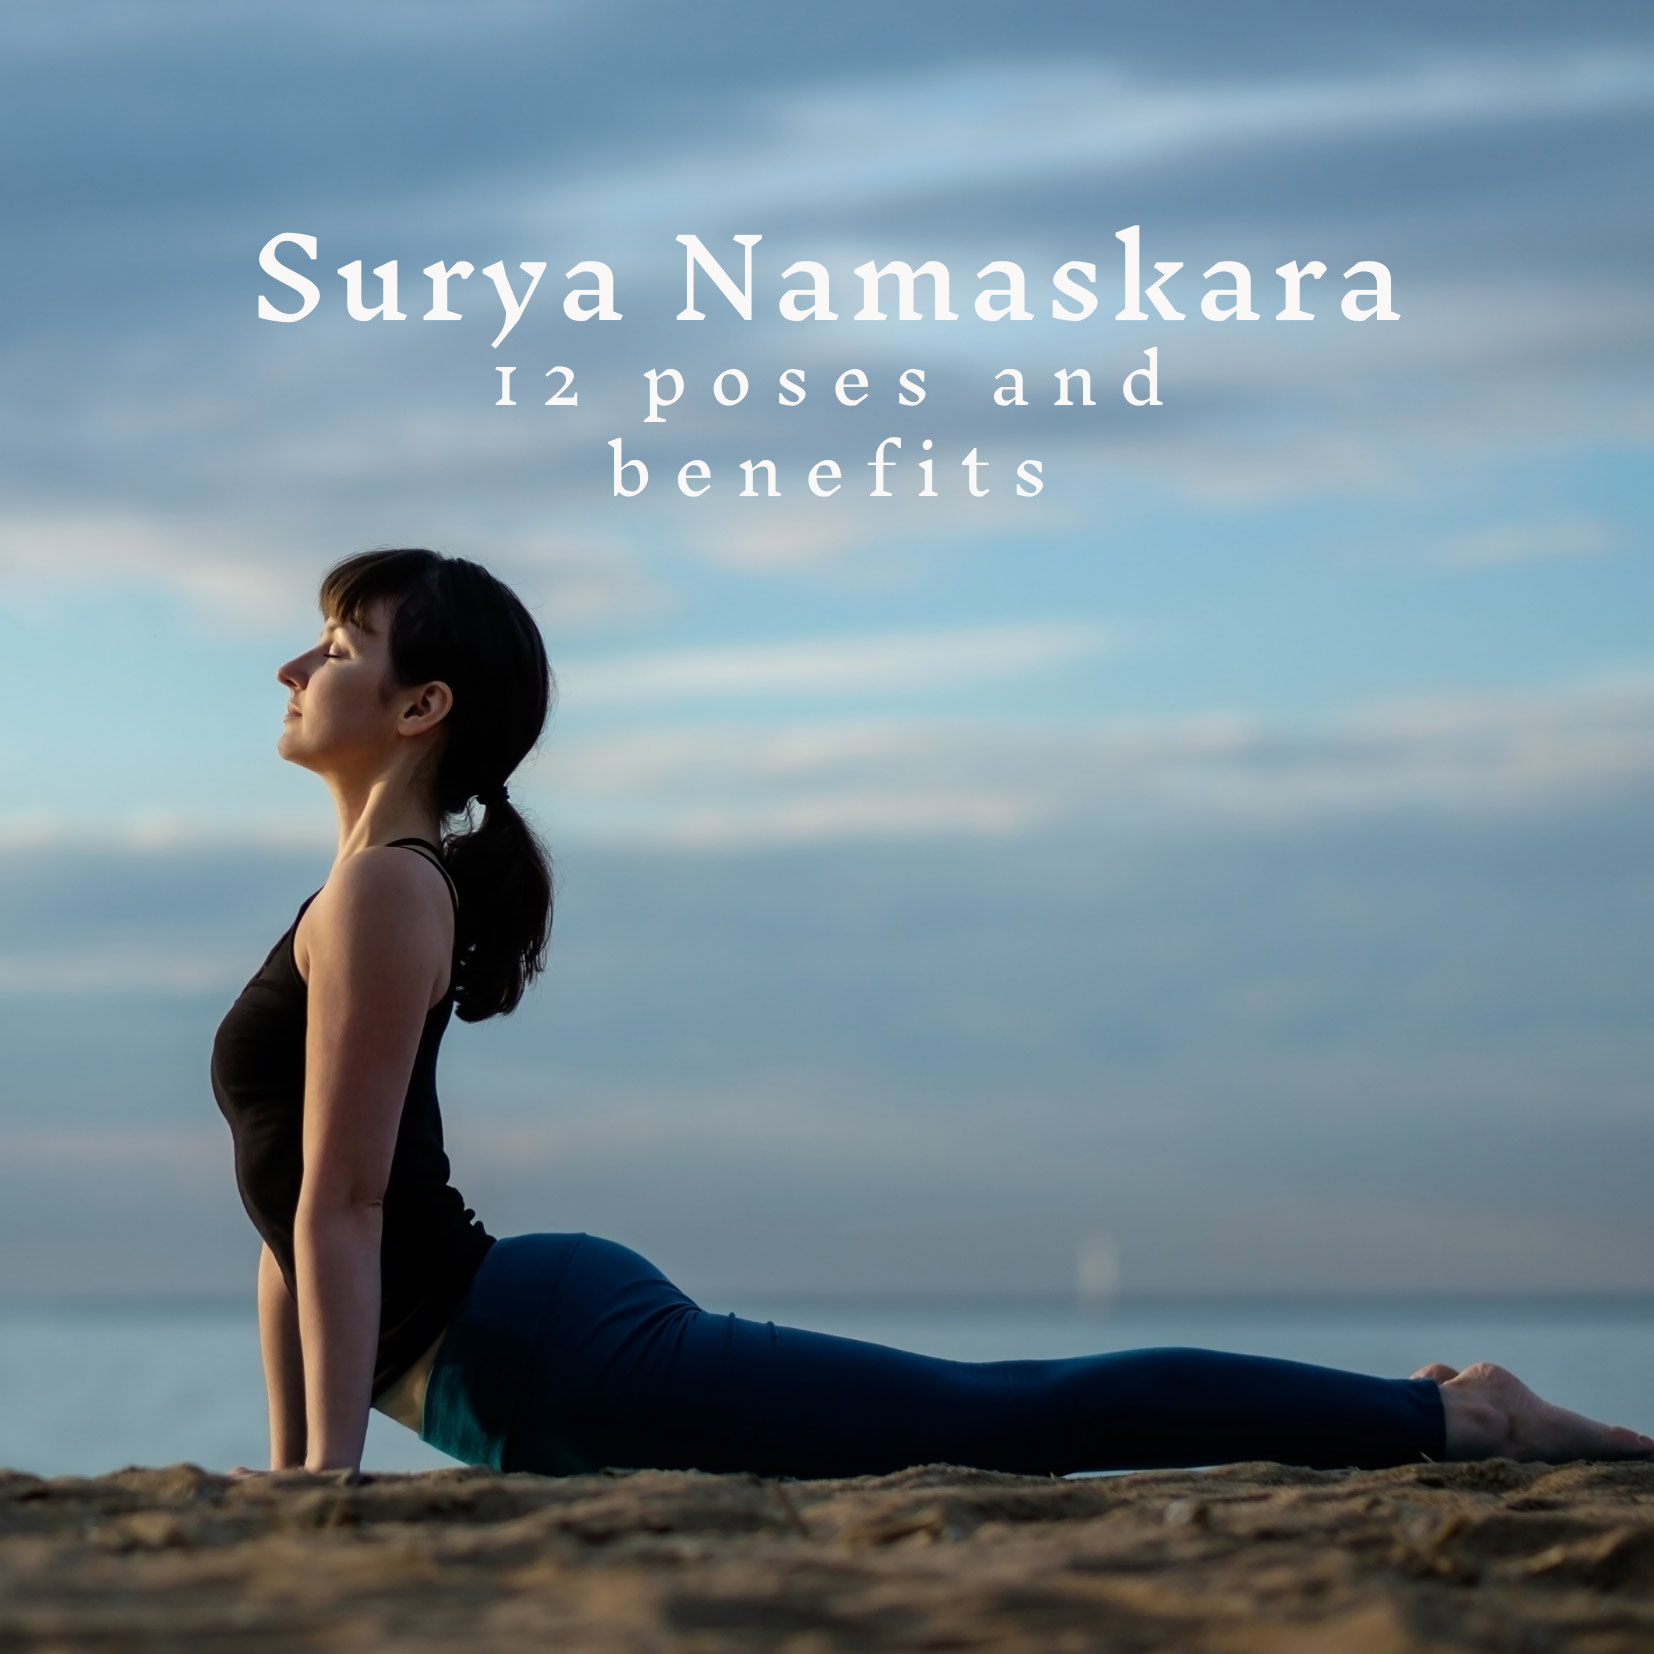 Surya Namaskar for weight loss: 5 tips for beginners | The Times of India